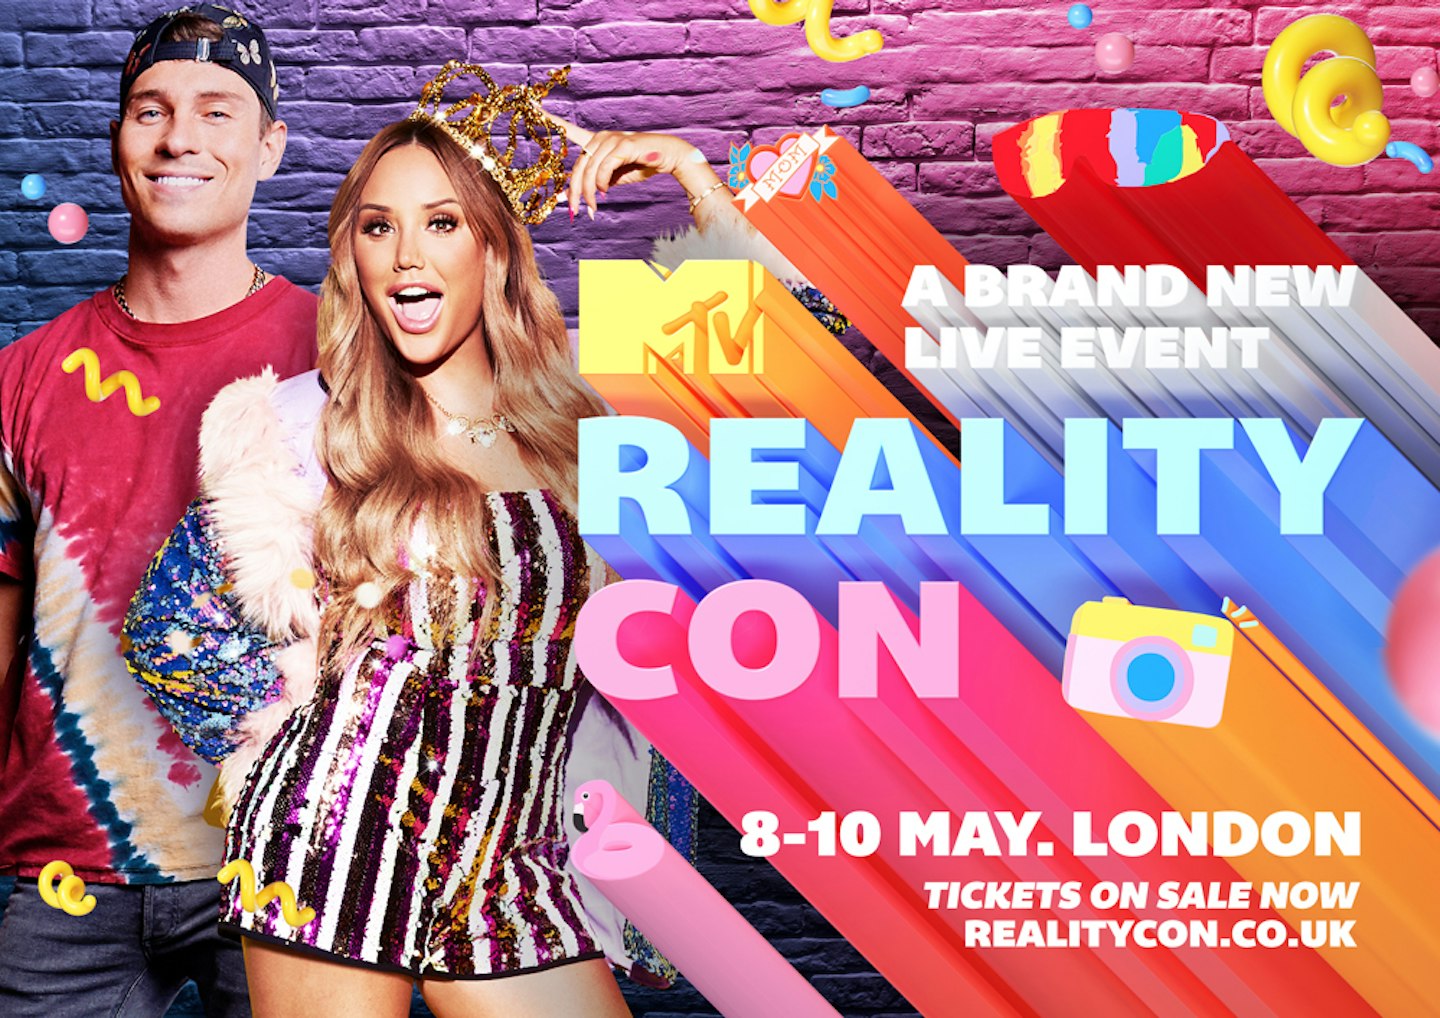 Joey Essex and Charlotte Crosby announce MTV's Reality Con London